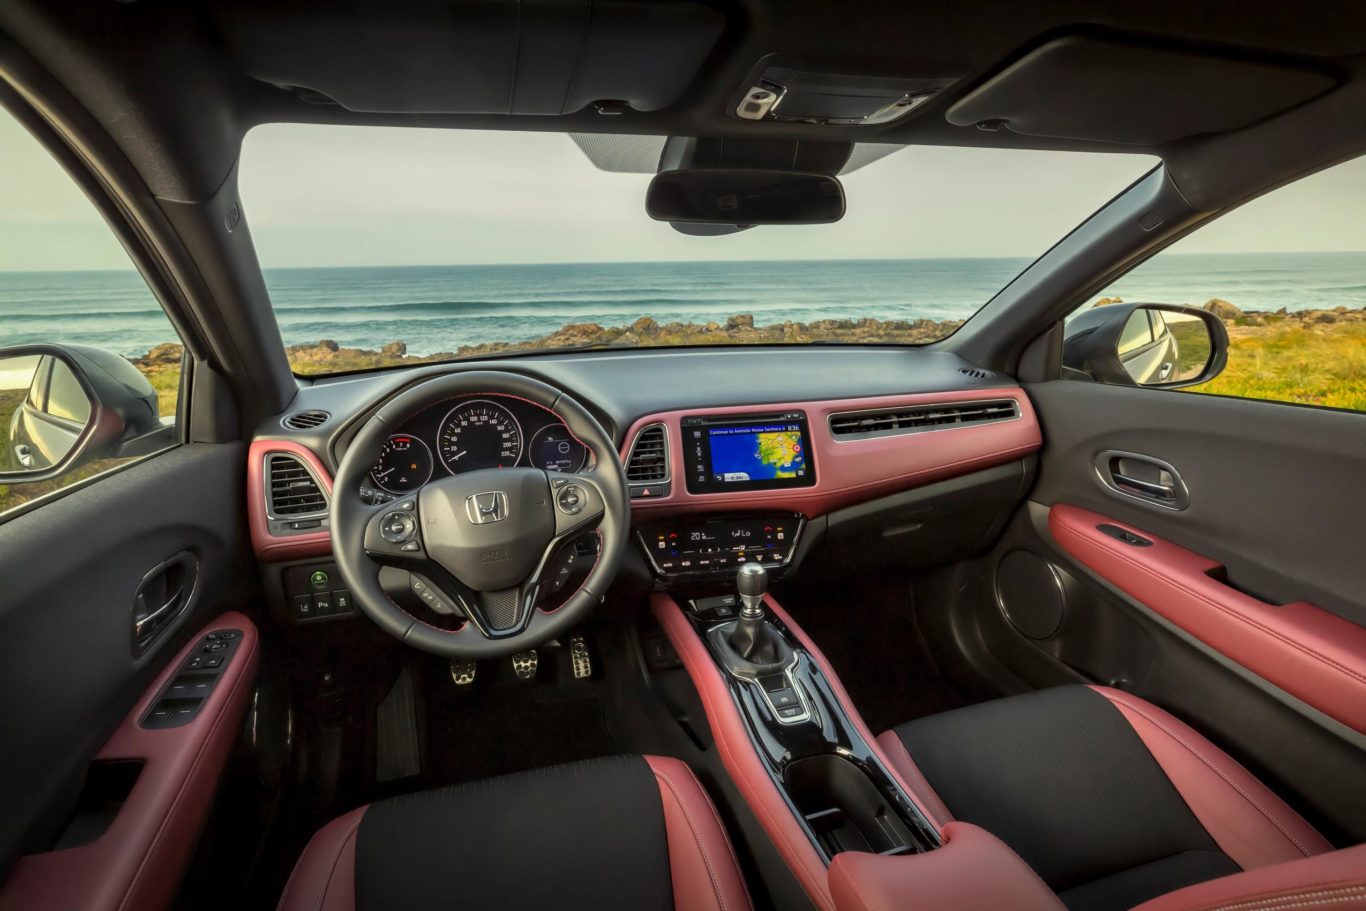 The interior features a range of dynamic touches